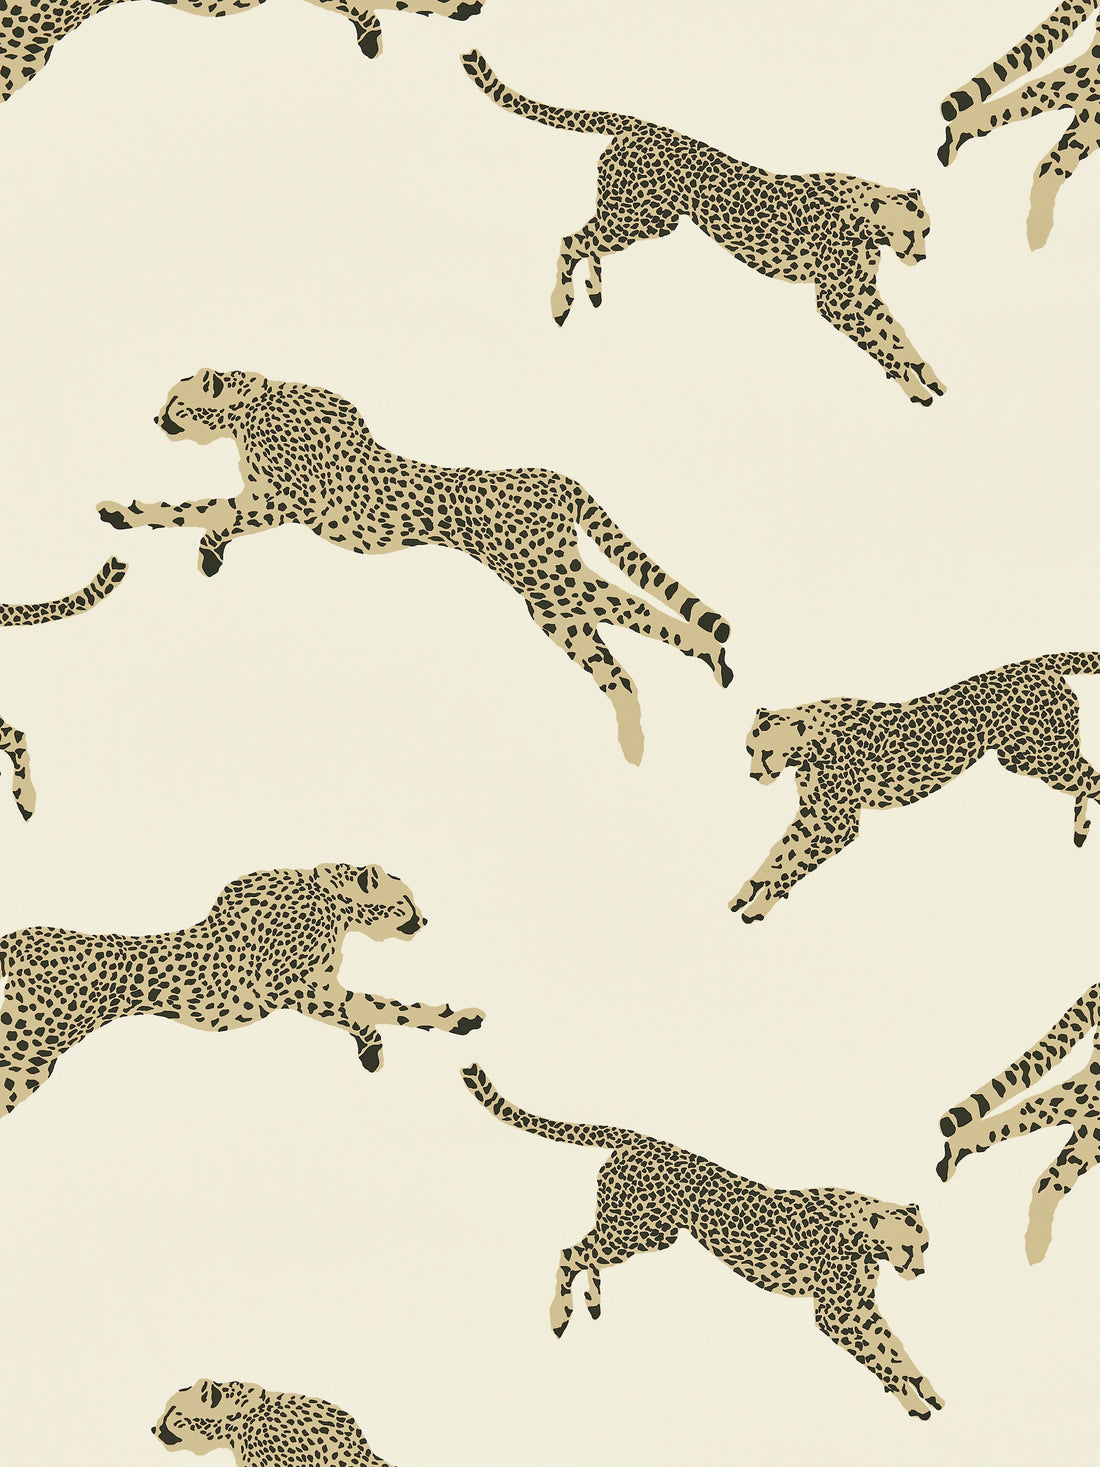 Leaping Cheetah Cotton Print fabric in dune color - pattern number SC 000116634 - by Scalamandre in the Scalamandre Fabrics Book 1 collection